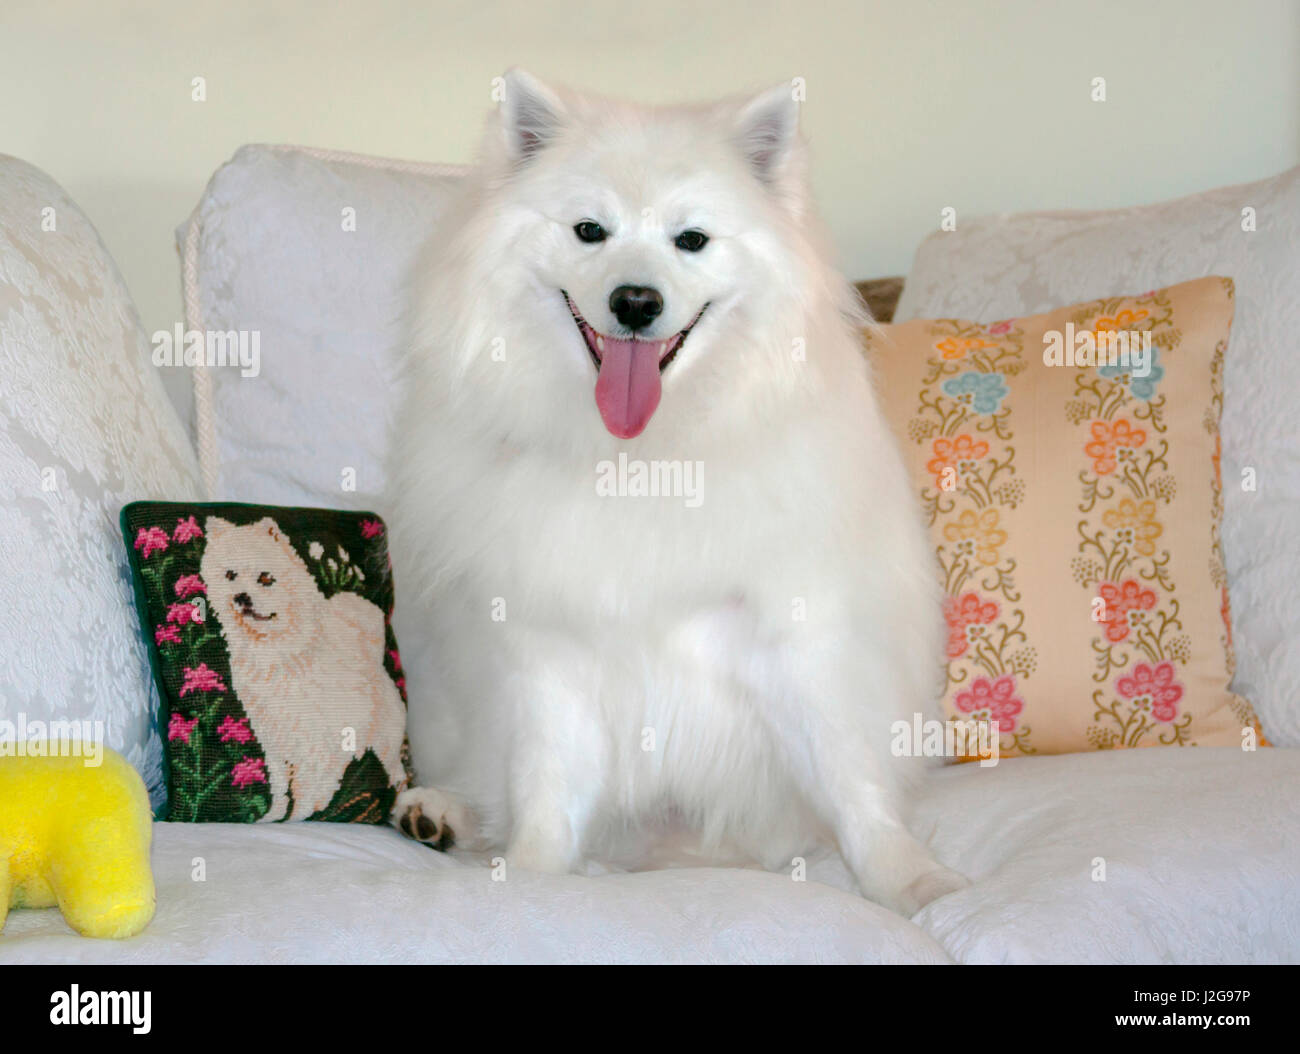 American Eskimo dog on white couch with pillows (MR & PR) Stock Photo